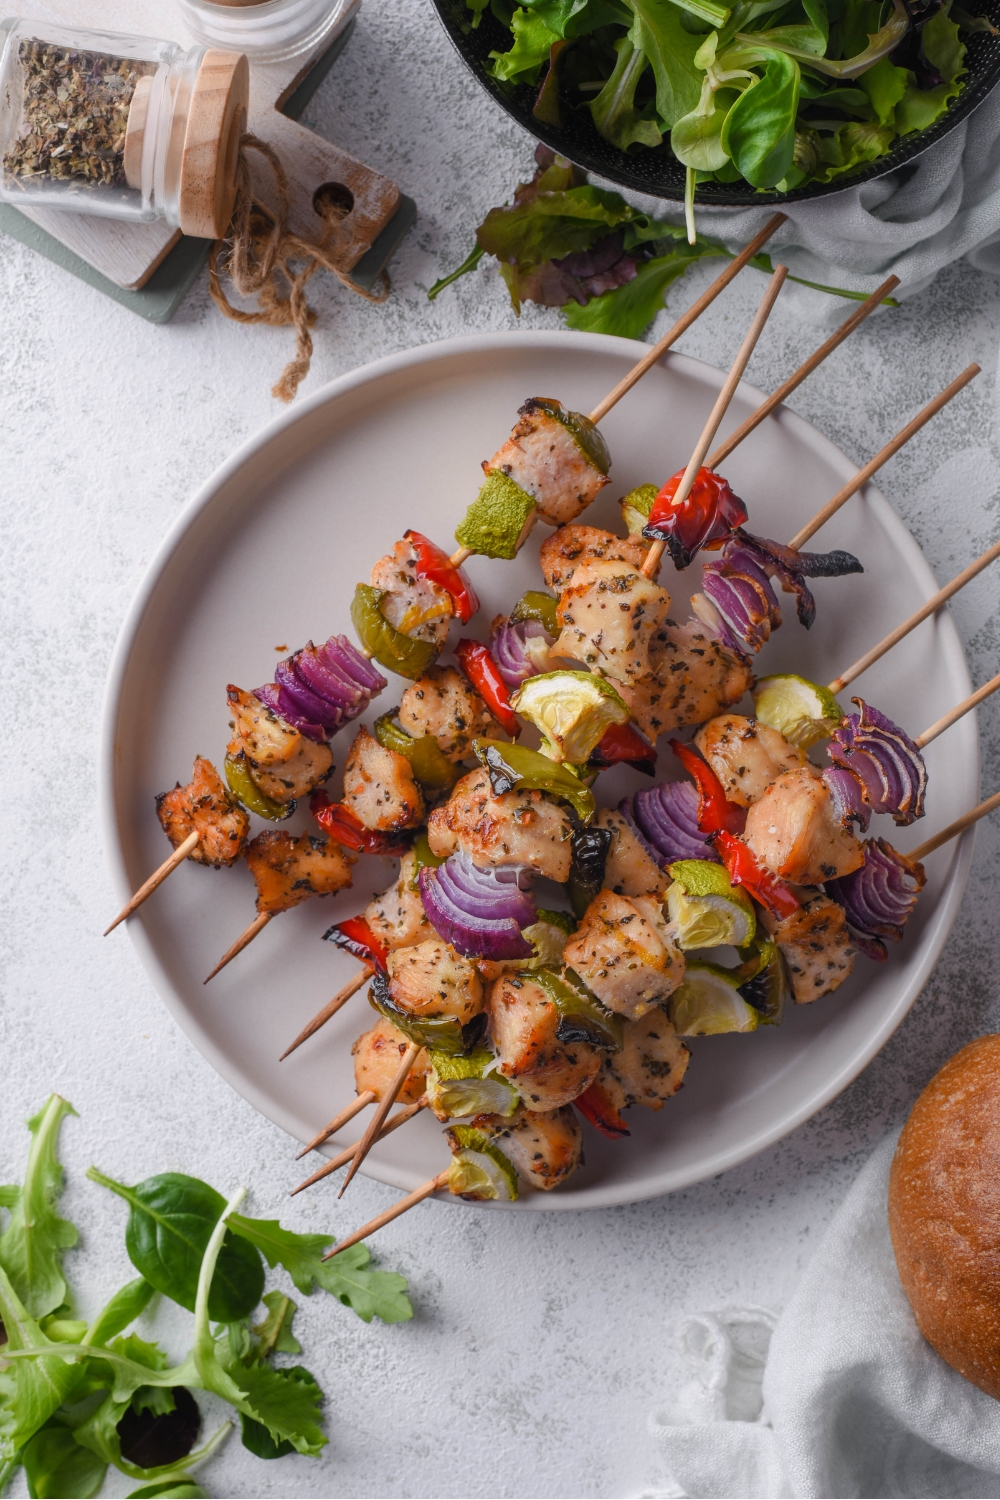 Overhead view of a plate of six chicken and vegetable skewers with red onion, bell pepper, and zucchini in the skewers.